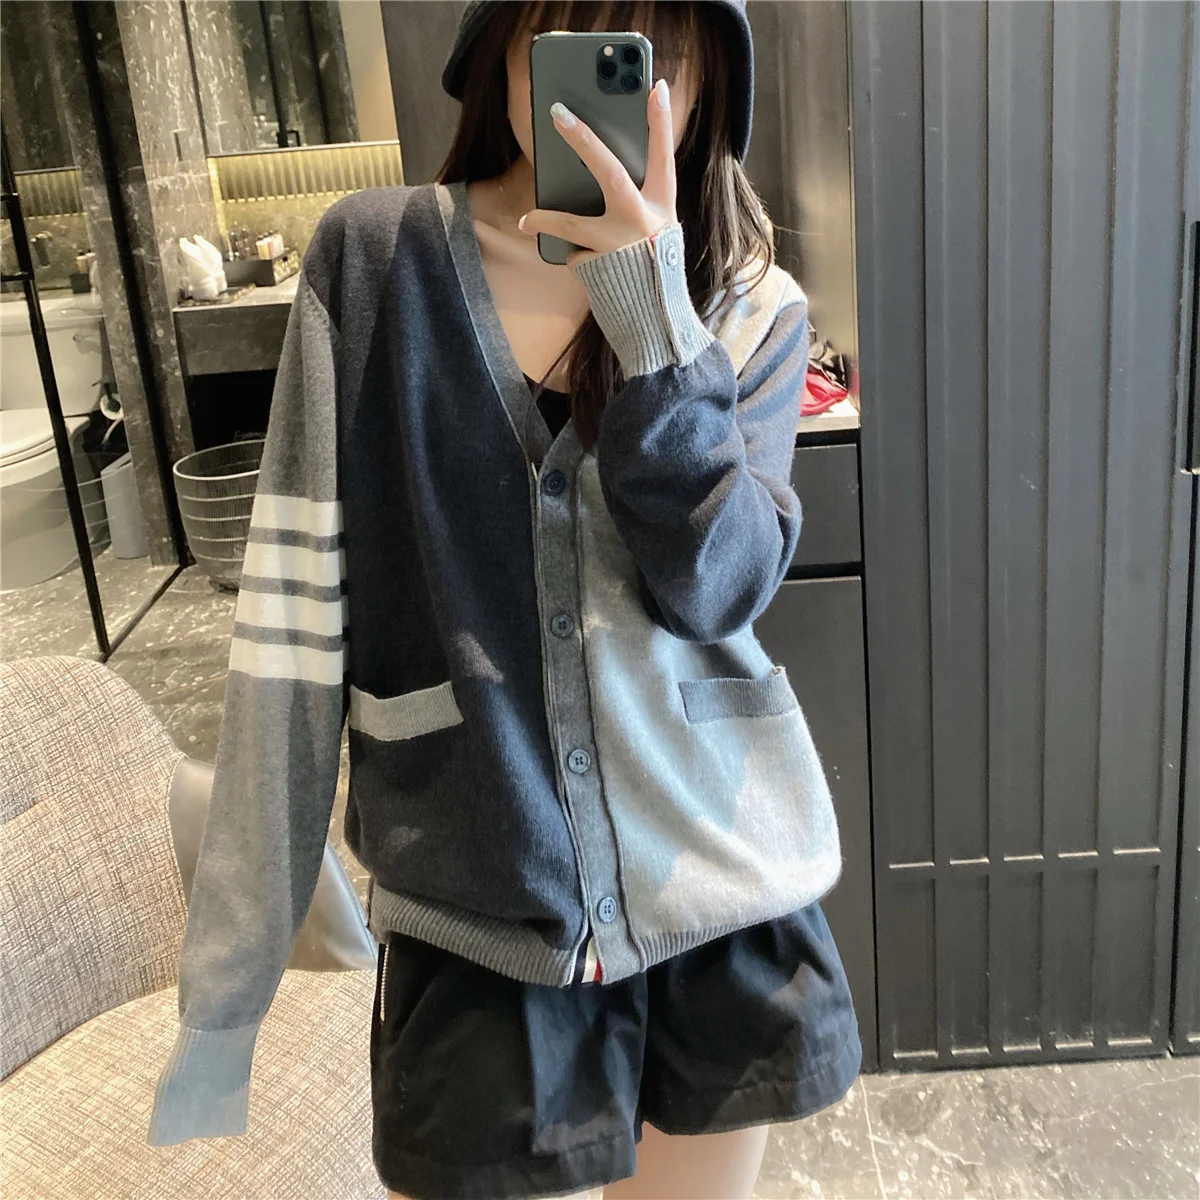 TB Korean Fashion Spring Autumn Color Contrast Wool Knitted Cardigan Long Sleeve Women's Sweater Loose Four Bar Stripe Coat Top